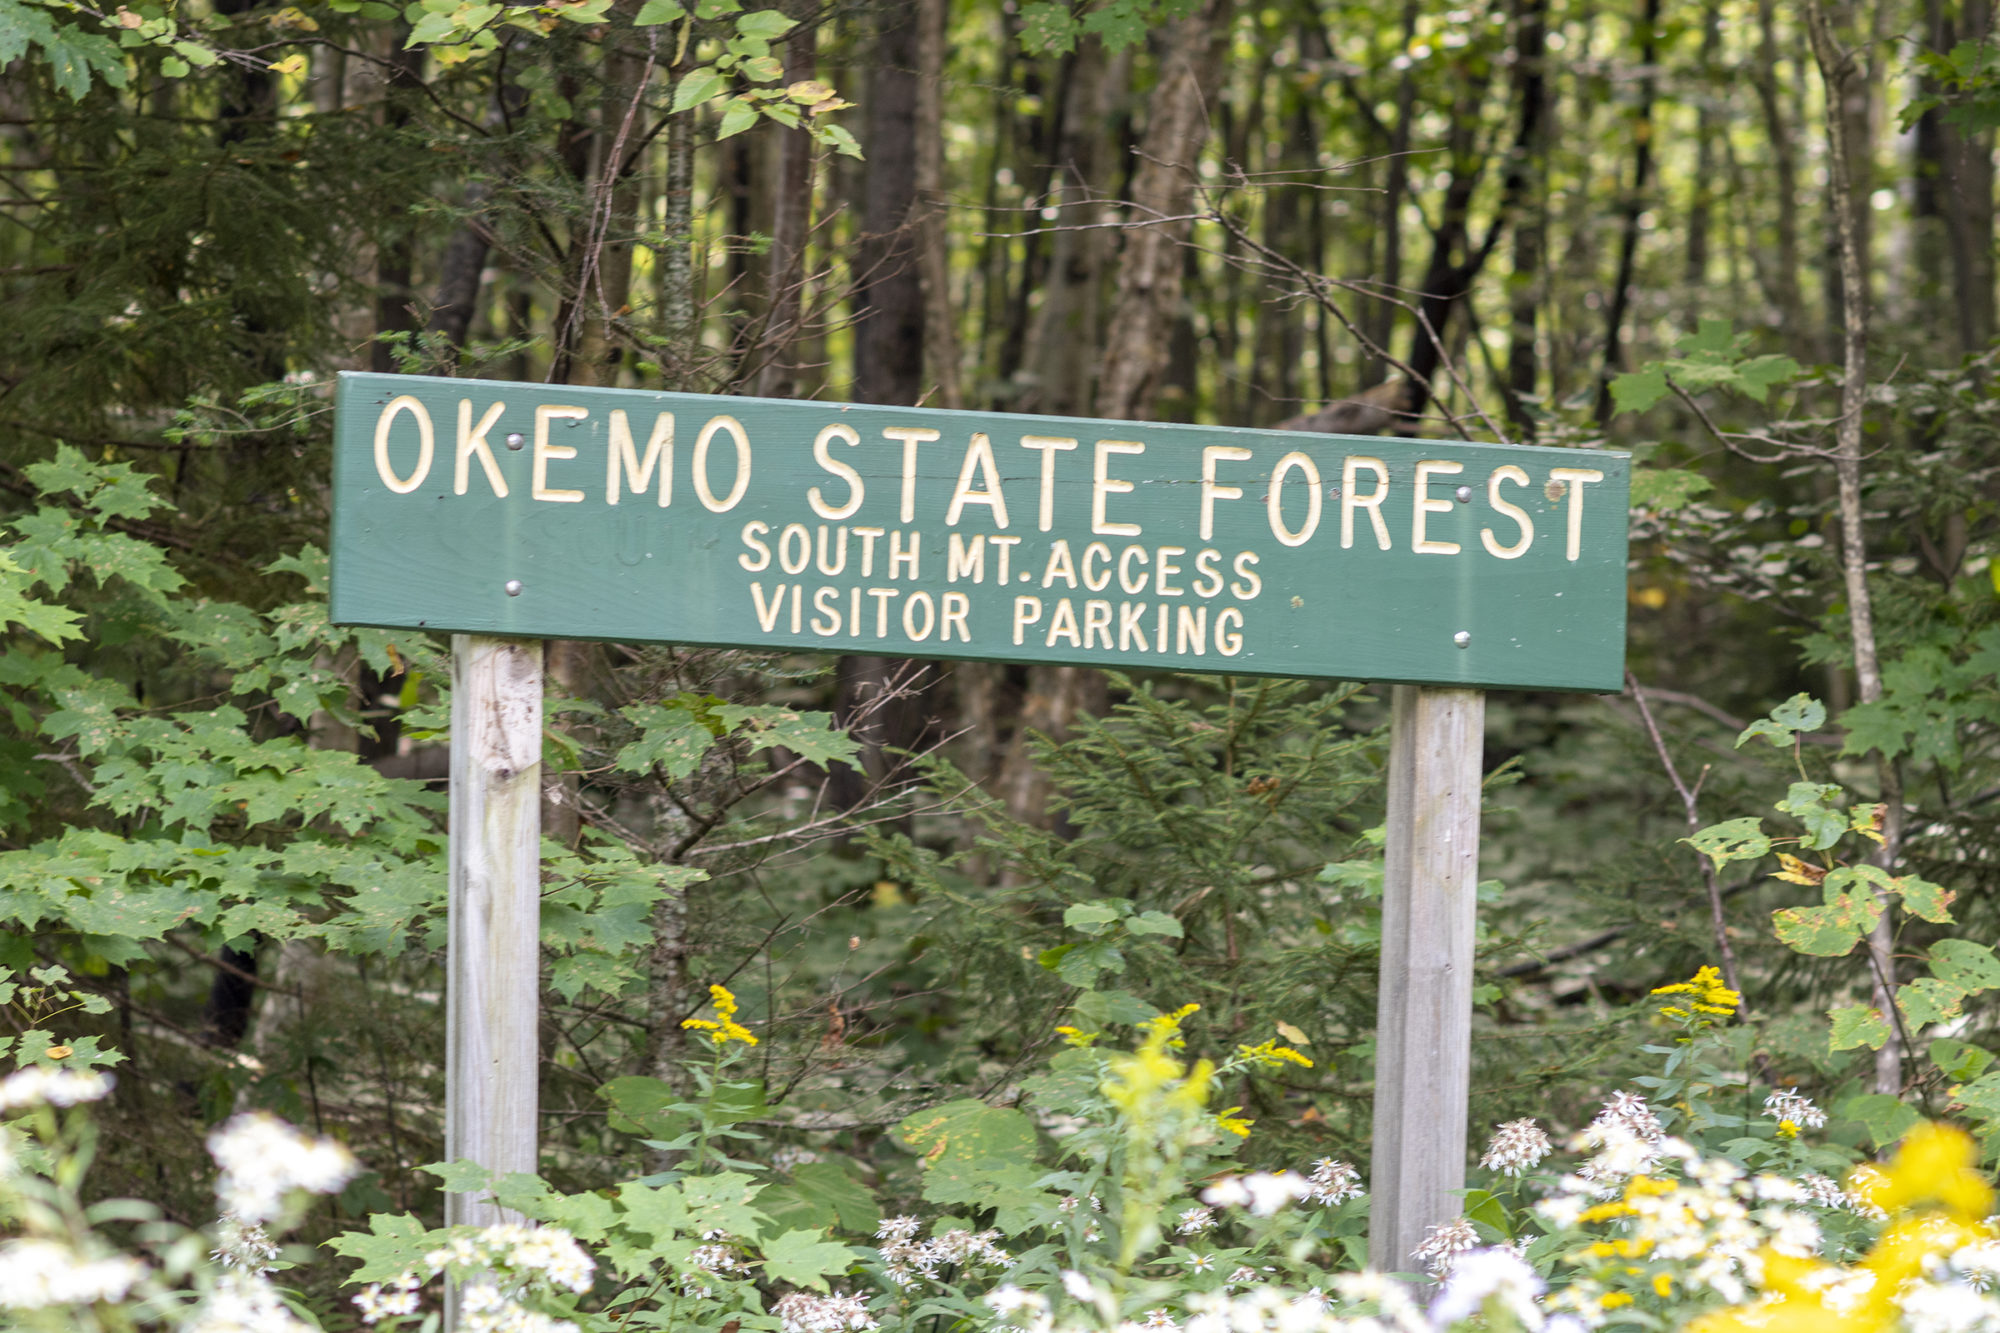 After the Vermont Department of Forests, Parks and Recreation received $1.5 million in COVID relief funding, there was an opportunity to fix an old access road in Okemo State Forest and expand recreational opportunities. Photo by Erica Houskeeper.